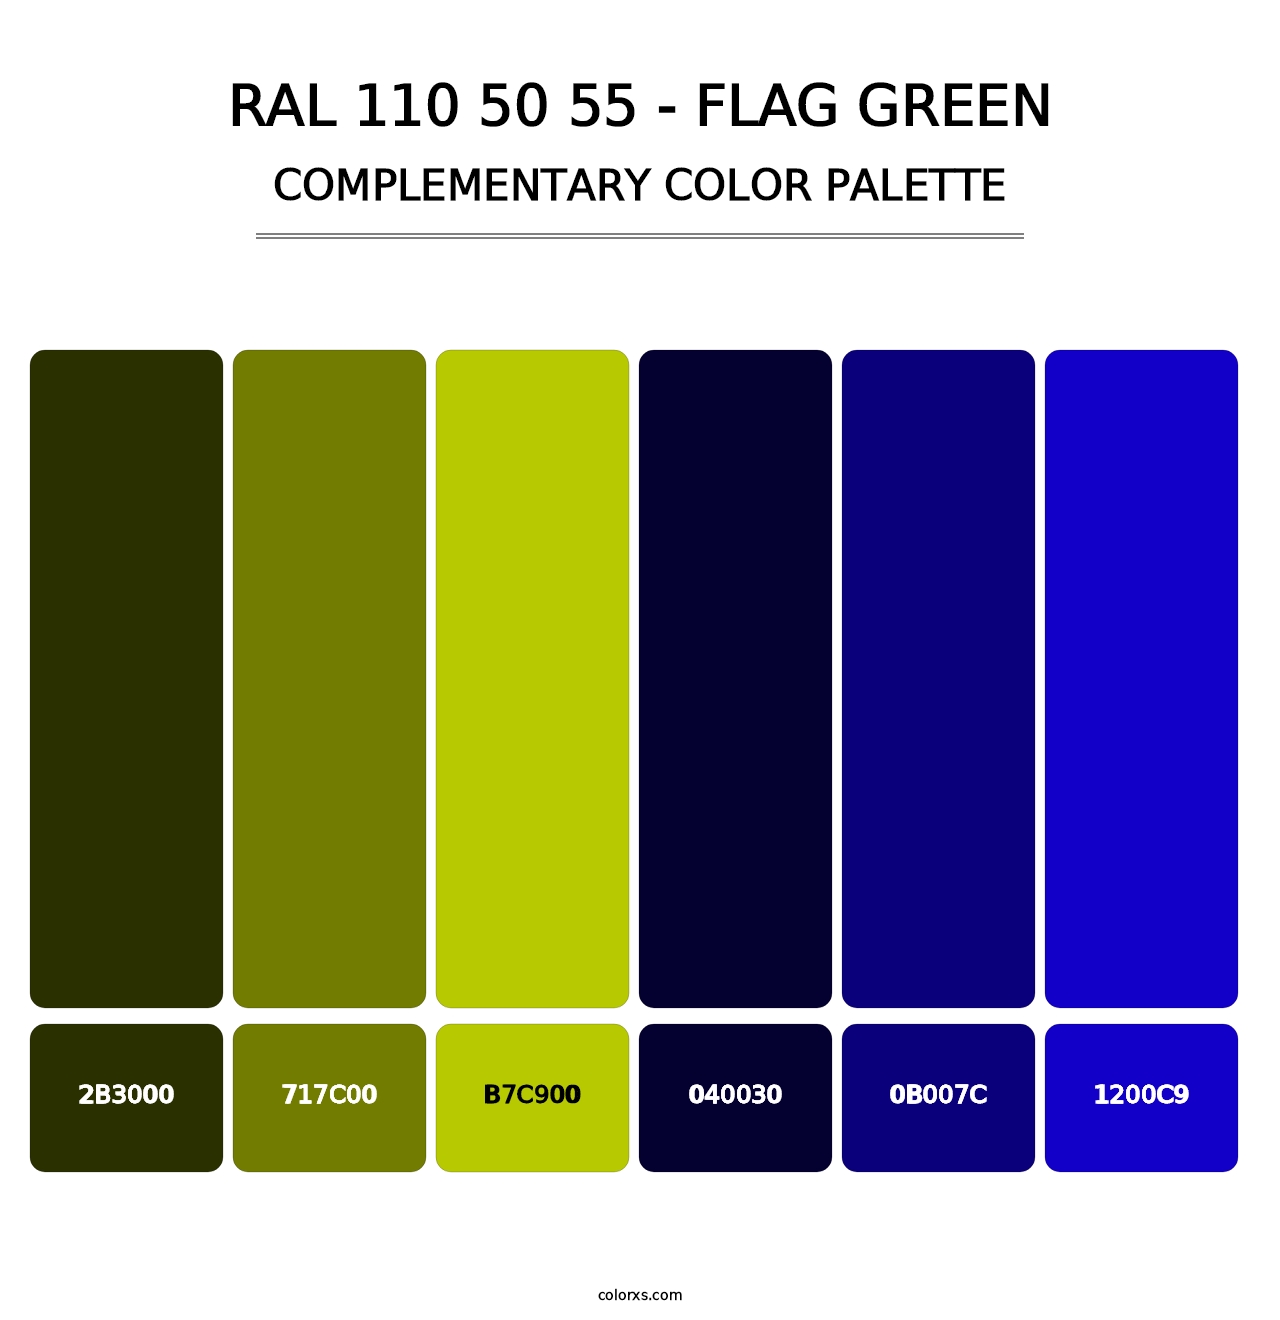 RAL 110 50 55 - Flag Green - Complementary Color Palette